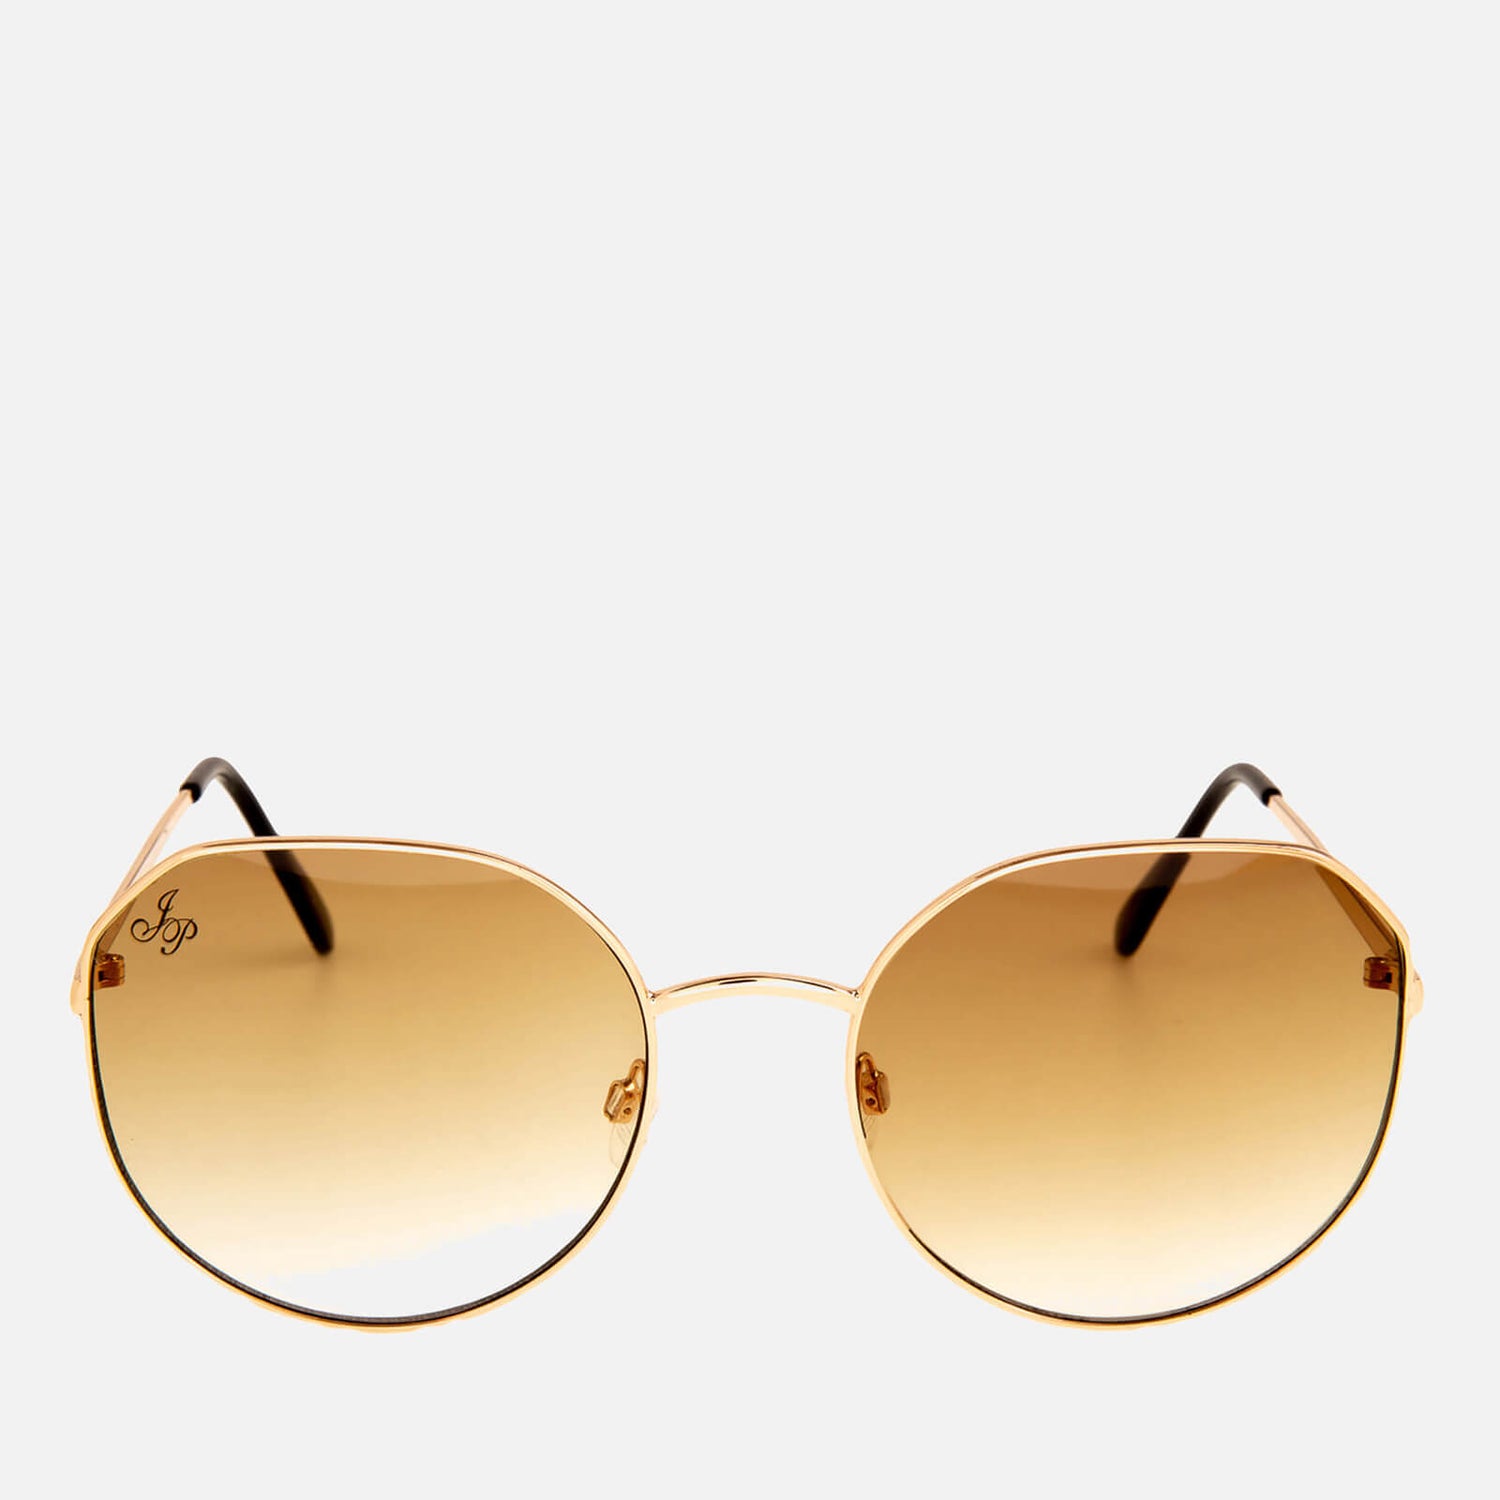 Jeepers Peepers Round Frame Sunglasses - Gold